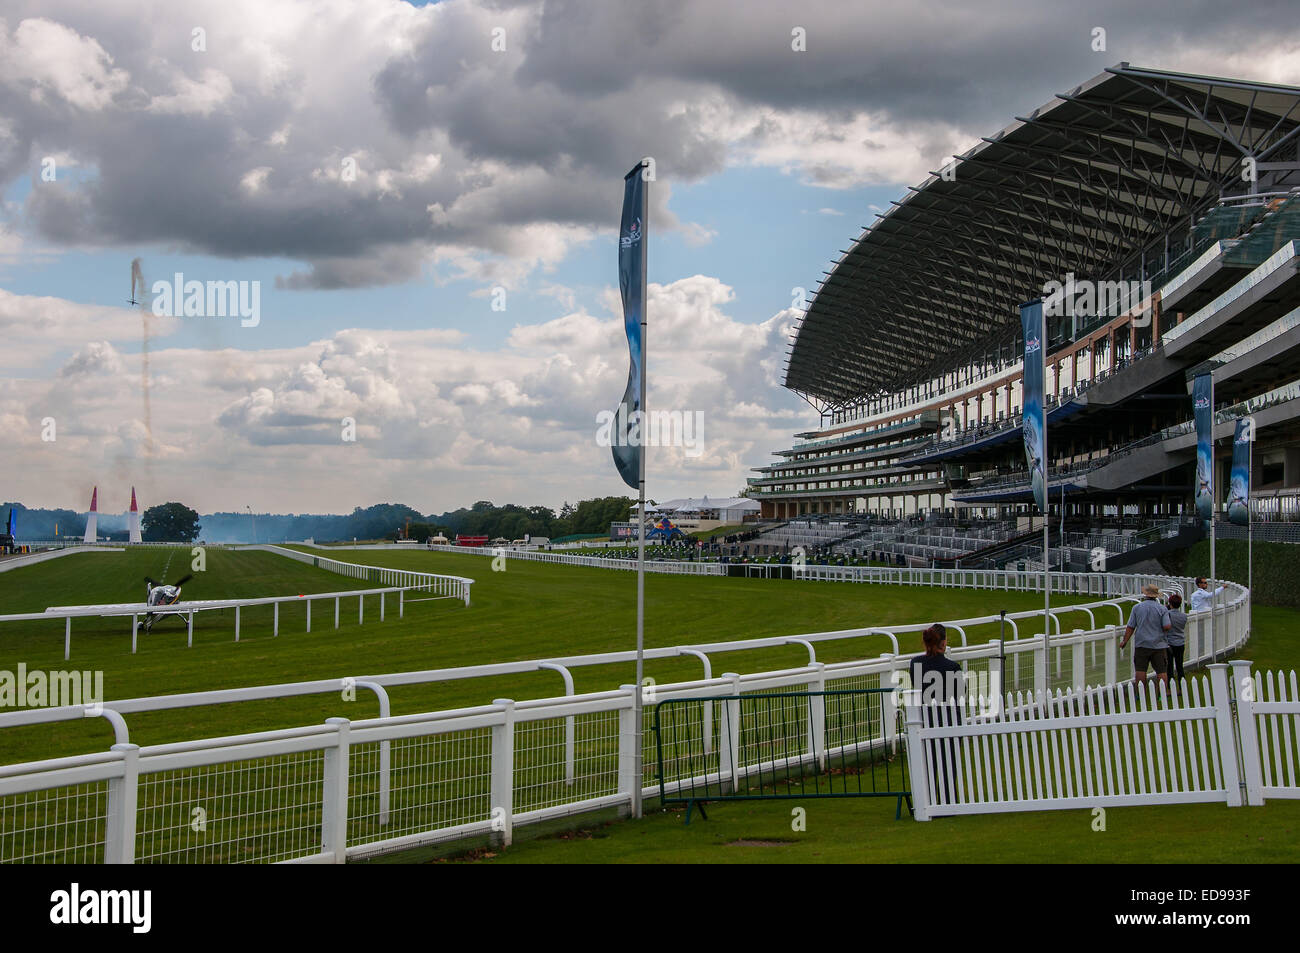 The UK round of the 2014 Red Bull Air Race series was held at Royal Ascot Racecourse, Berkshire, UK. Granstand, track and fences. Space for copy Stock Photo